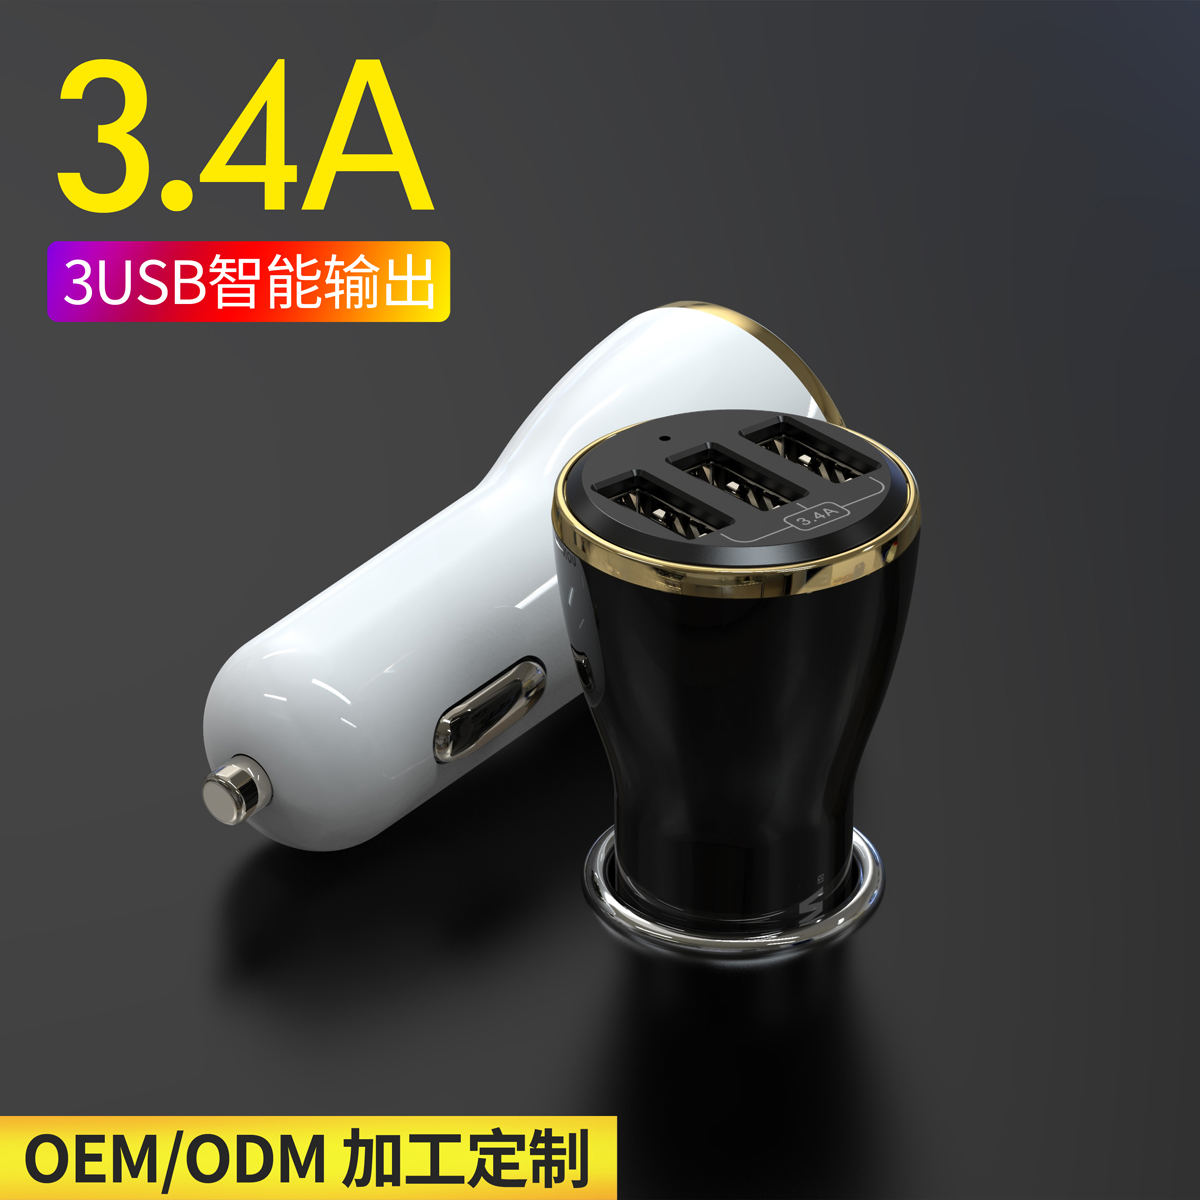 5V 3.4a triple USB car charger Manufacturers, 5V 3.4a triple USB car charger Factory, Supply 5V 3.4a triple USB car charger